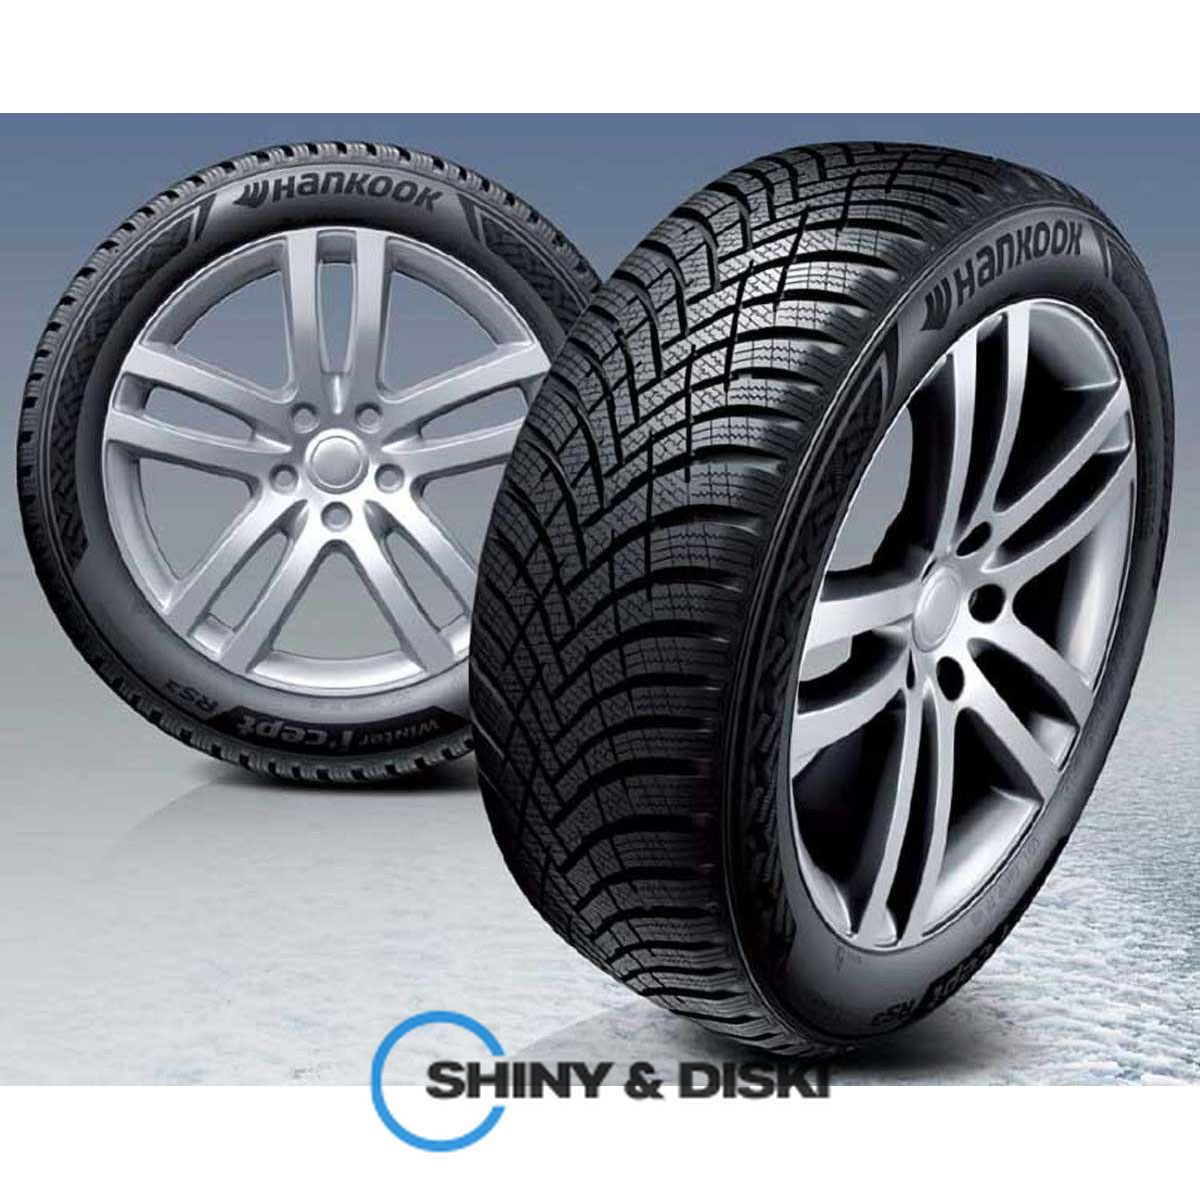 покрышки hankook winter i*cept rs3 w462 225/45 r17 94h